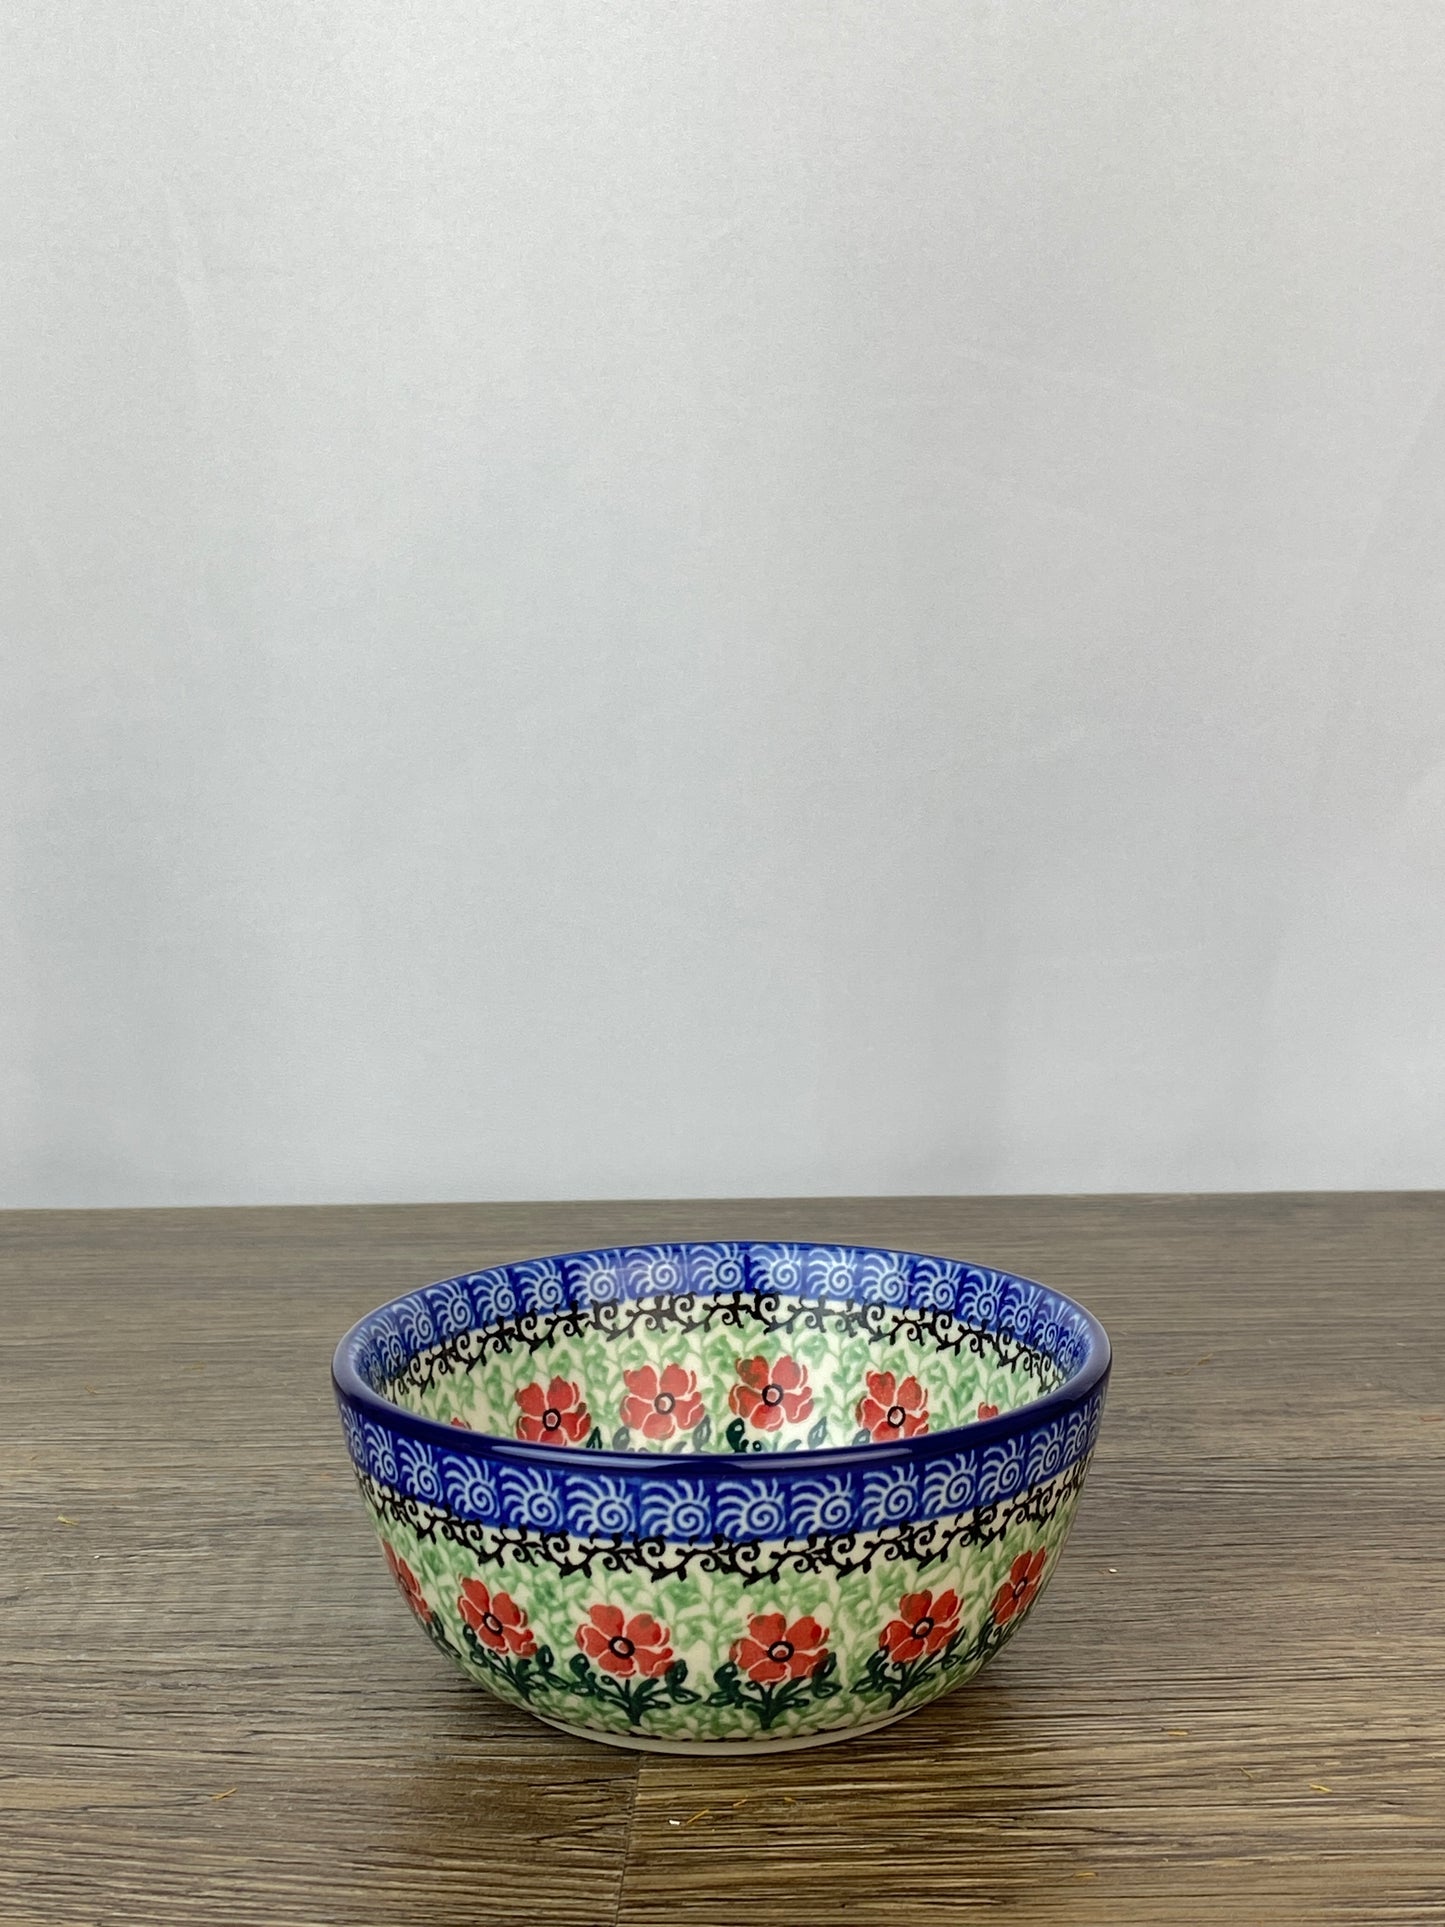 Small Cereal / Dessert Bowl - Shape 17 - Pattern 1916